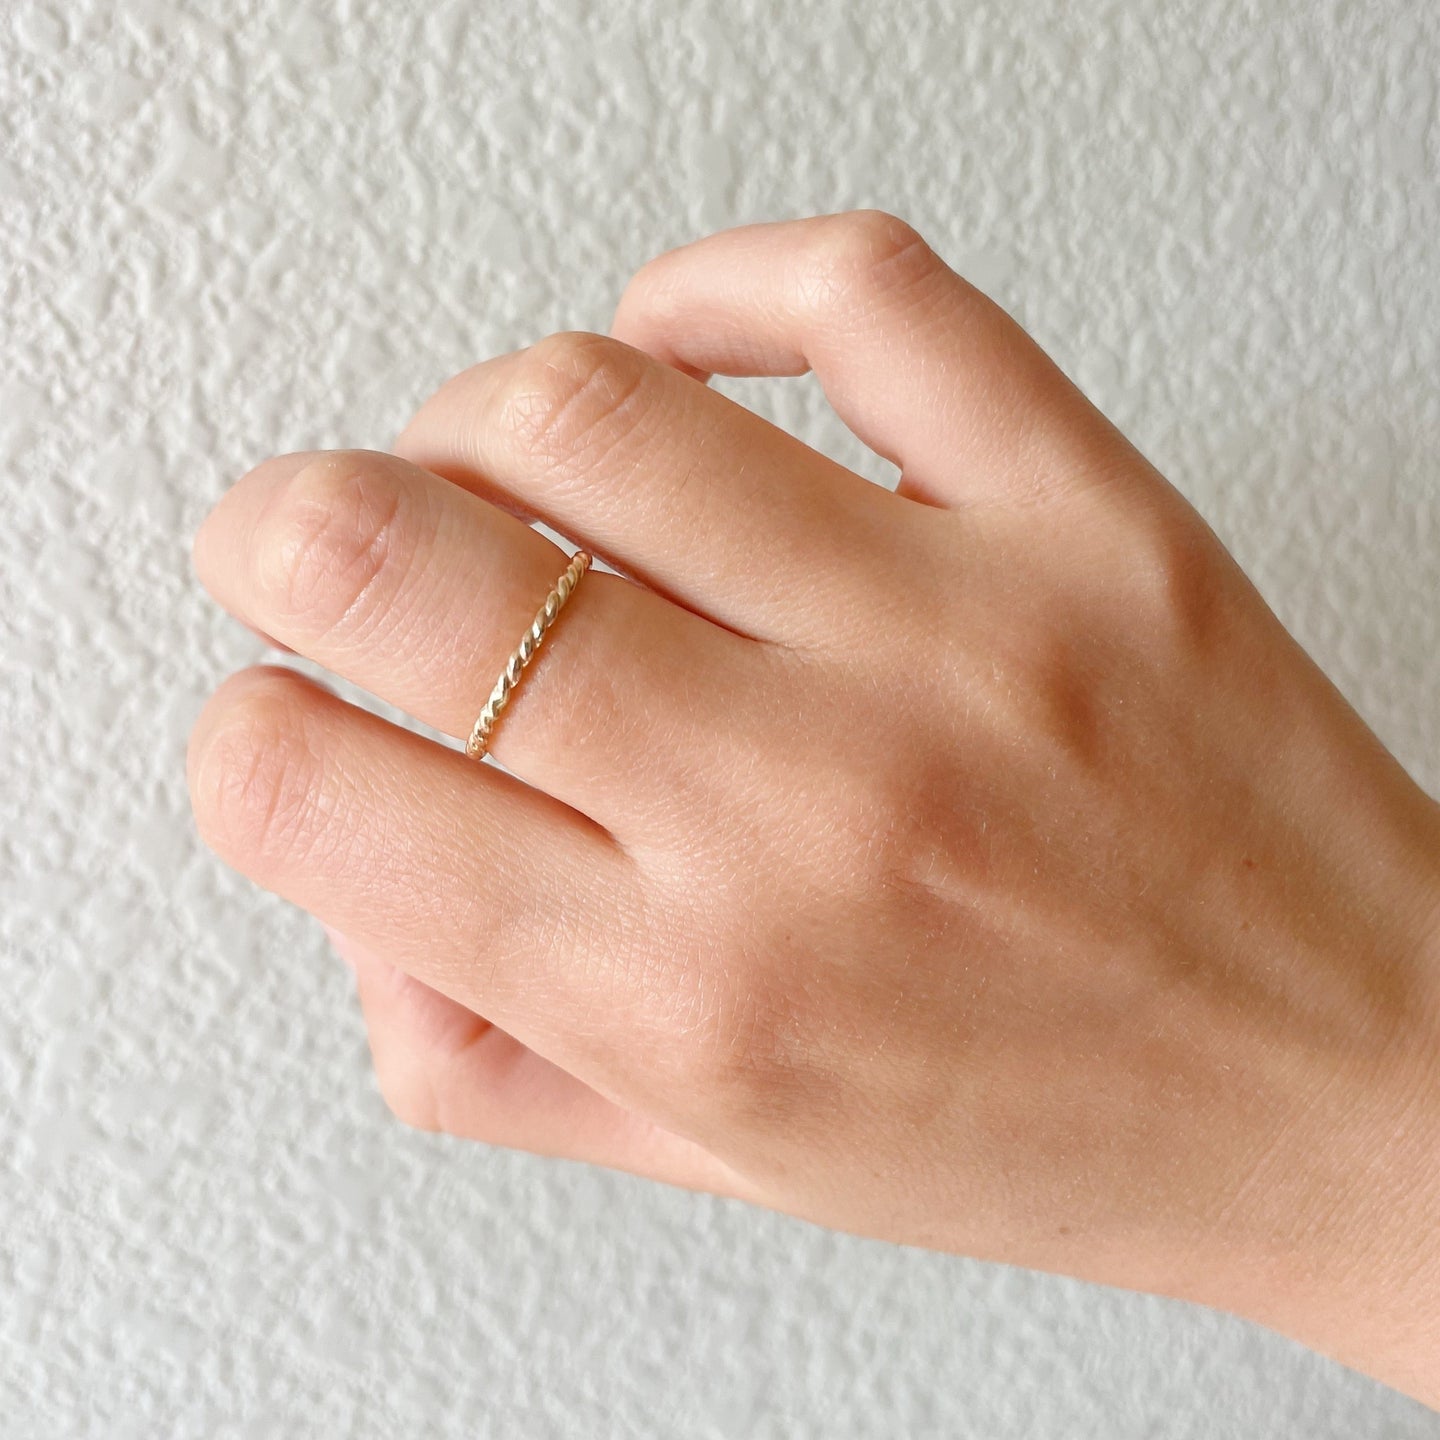 Gold Rope Ring